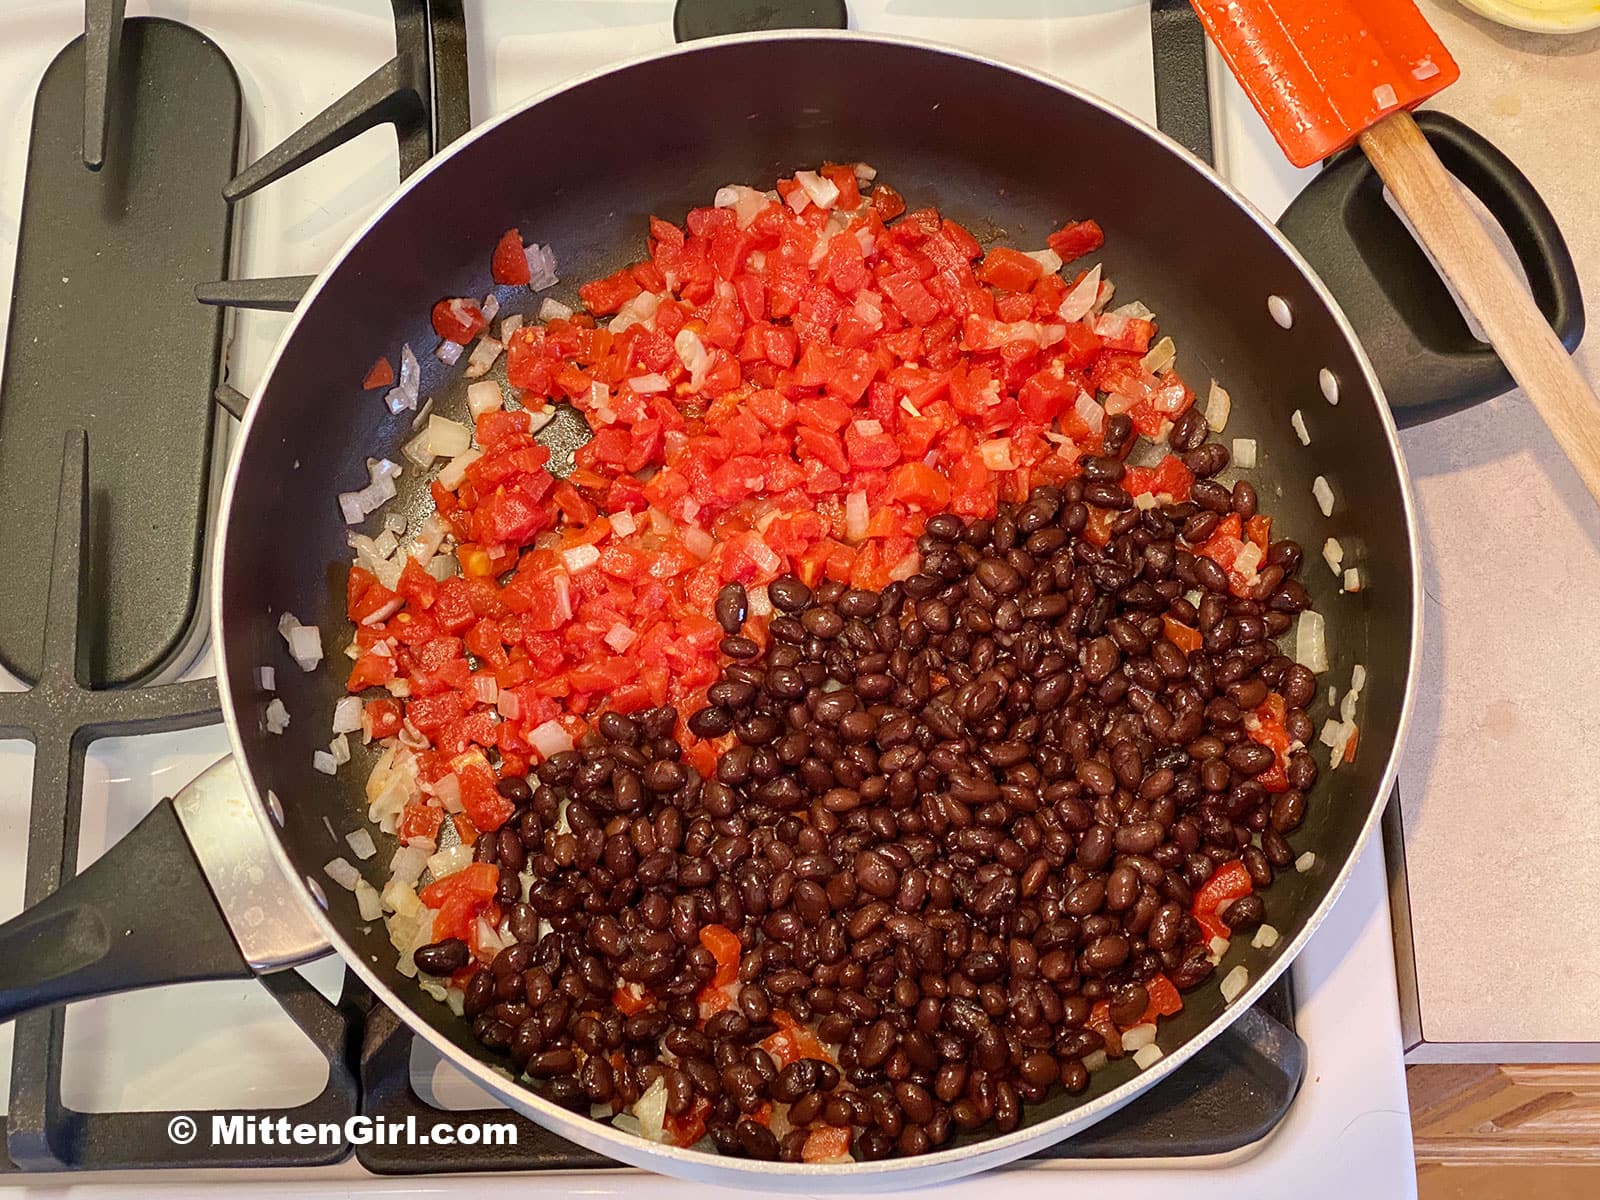 Tomatoes and black beans in a skillet